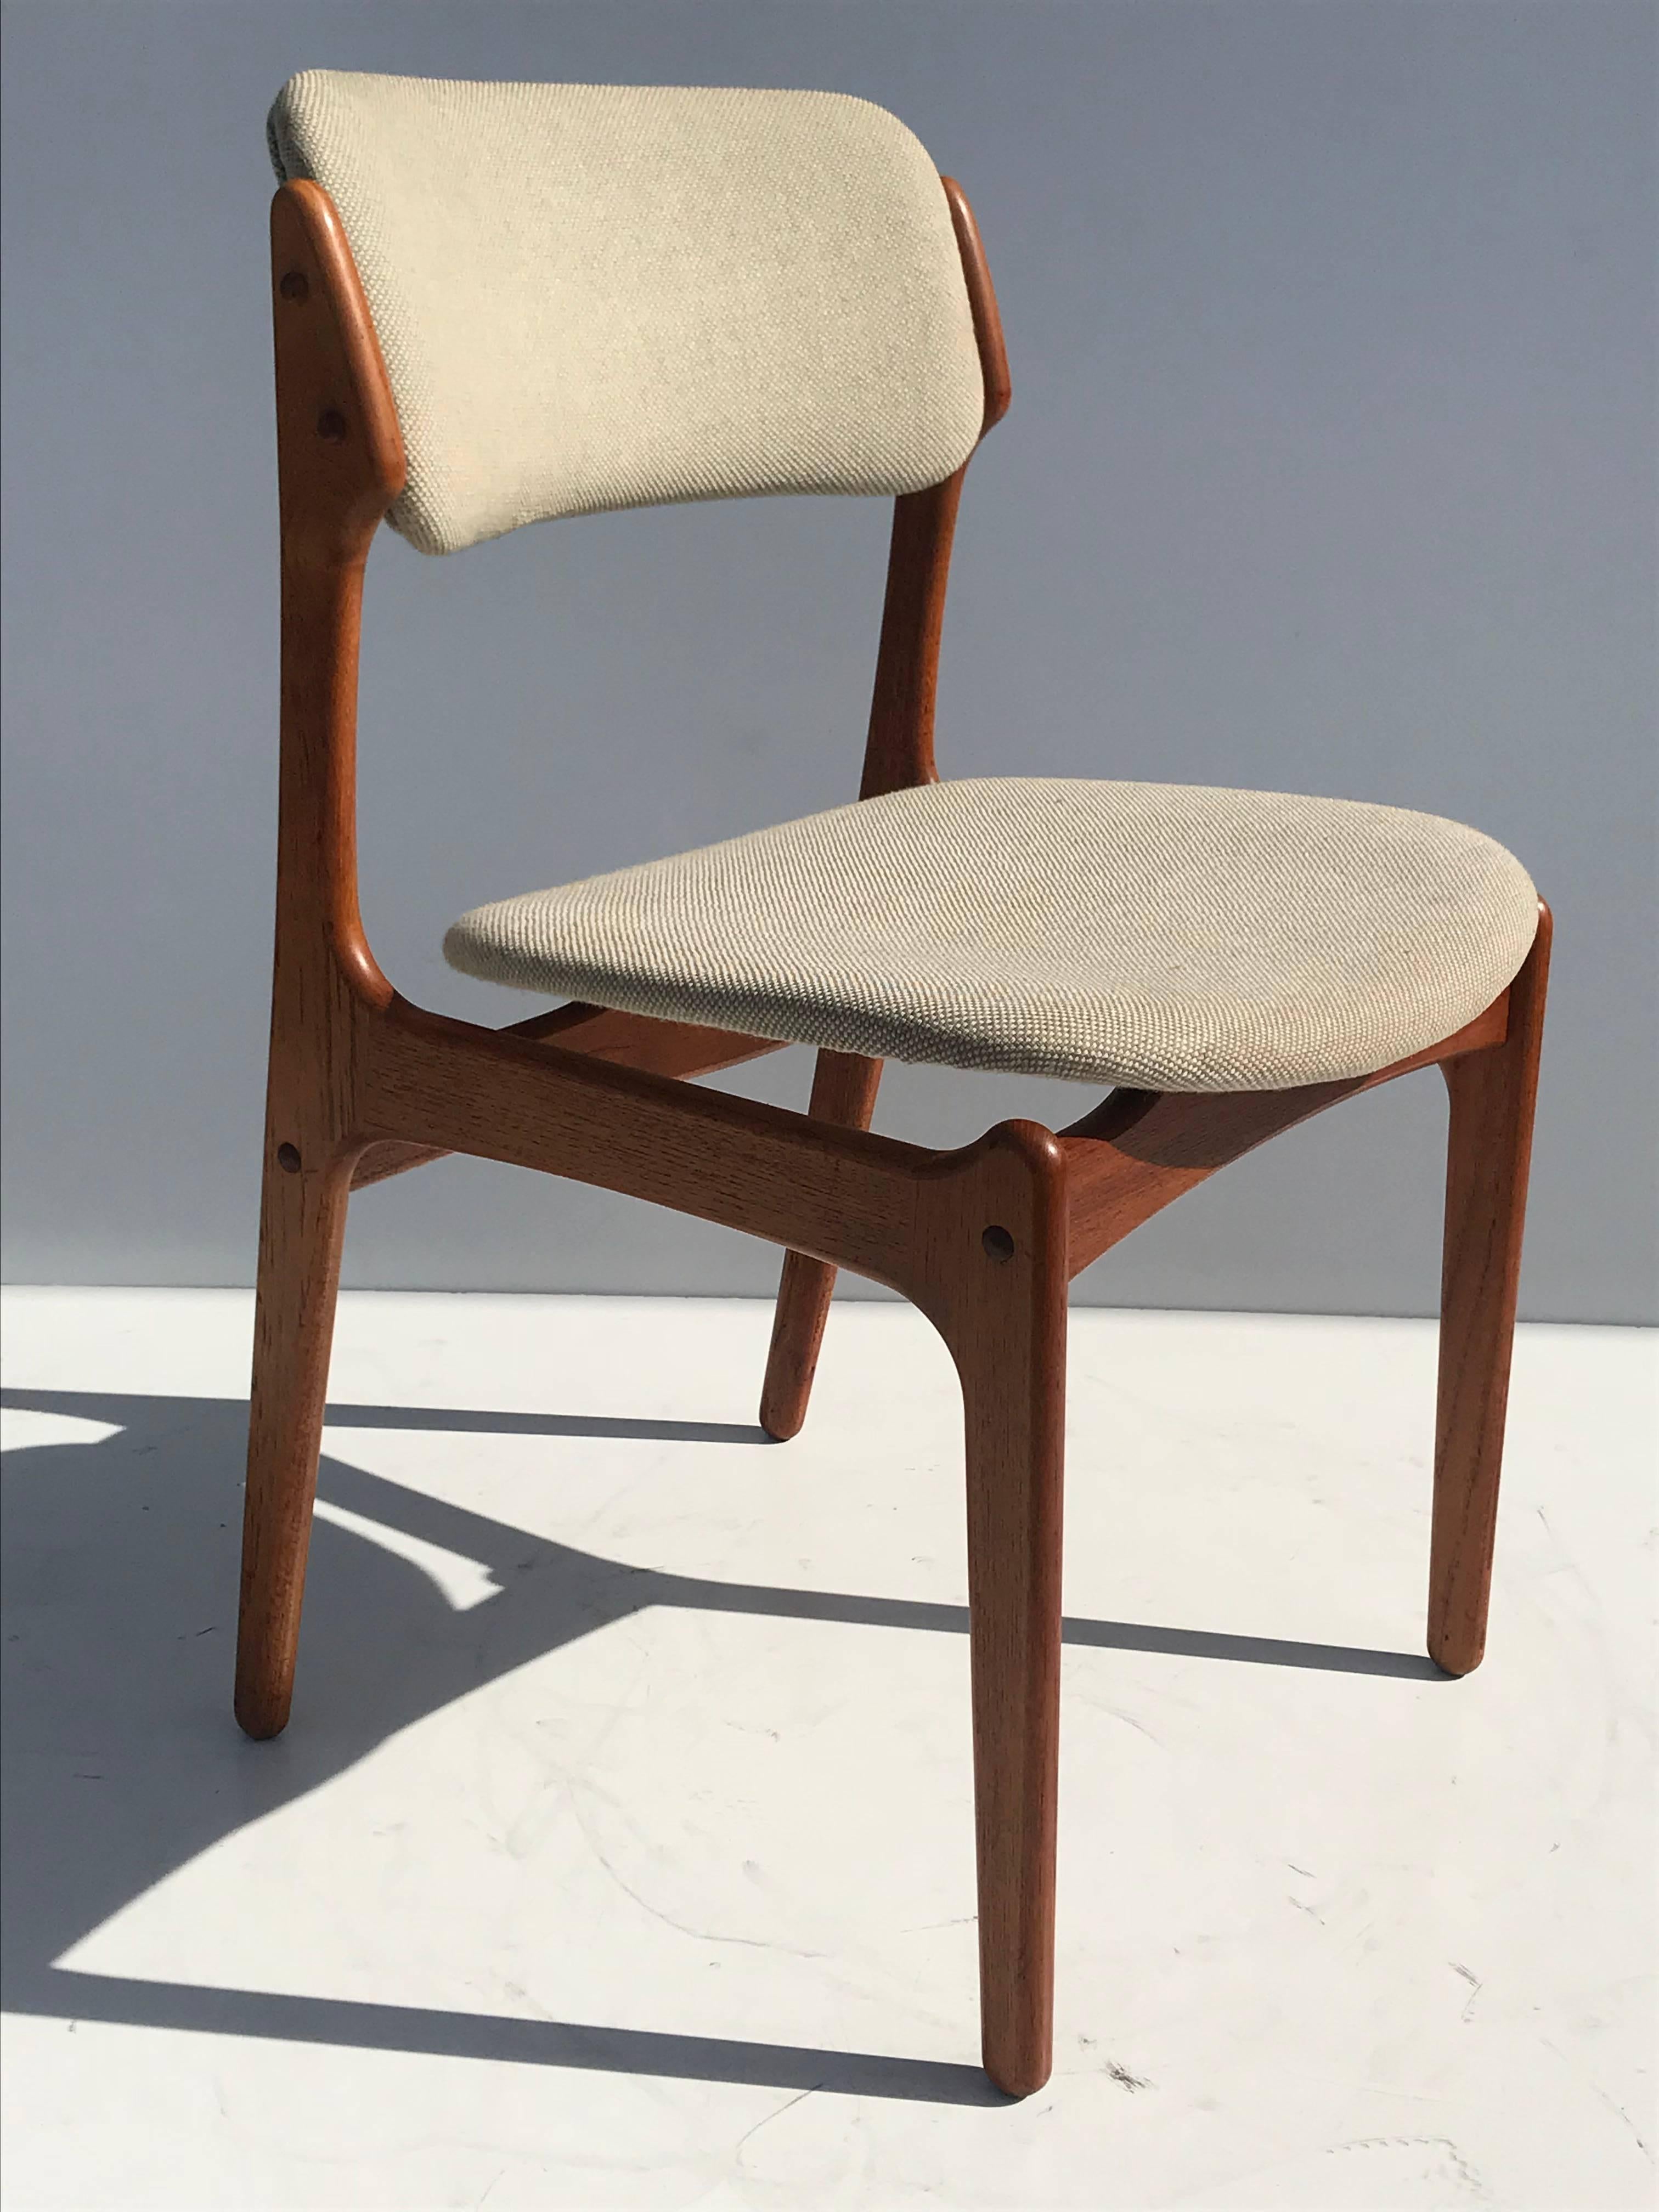 Set of four Danish modern Erik Buch teak chairs . Reupholstery recommended.